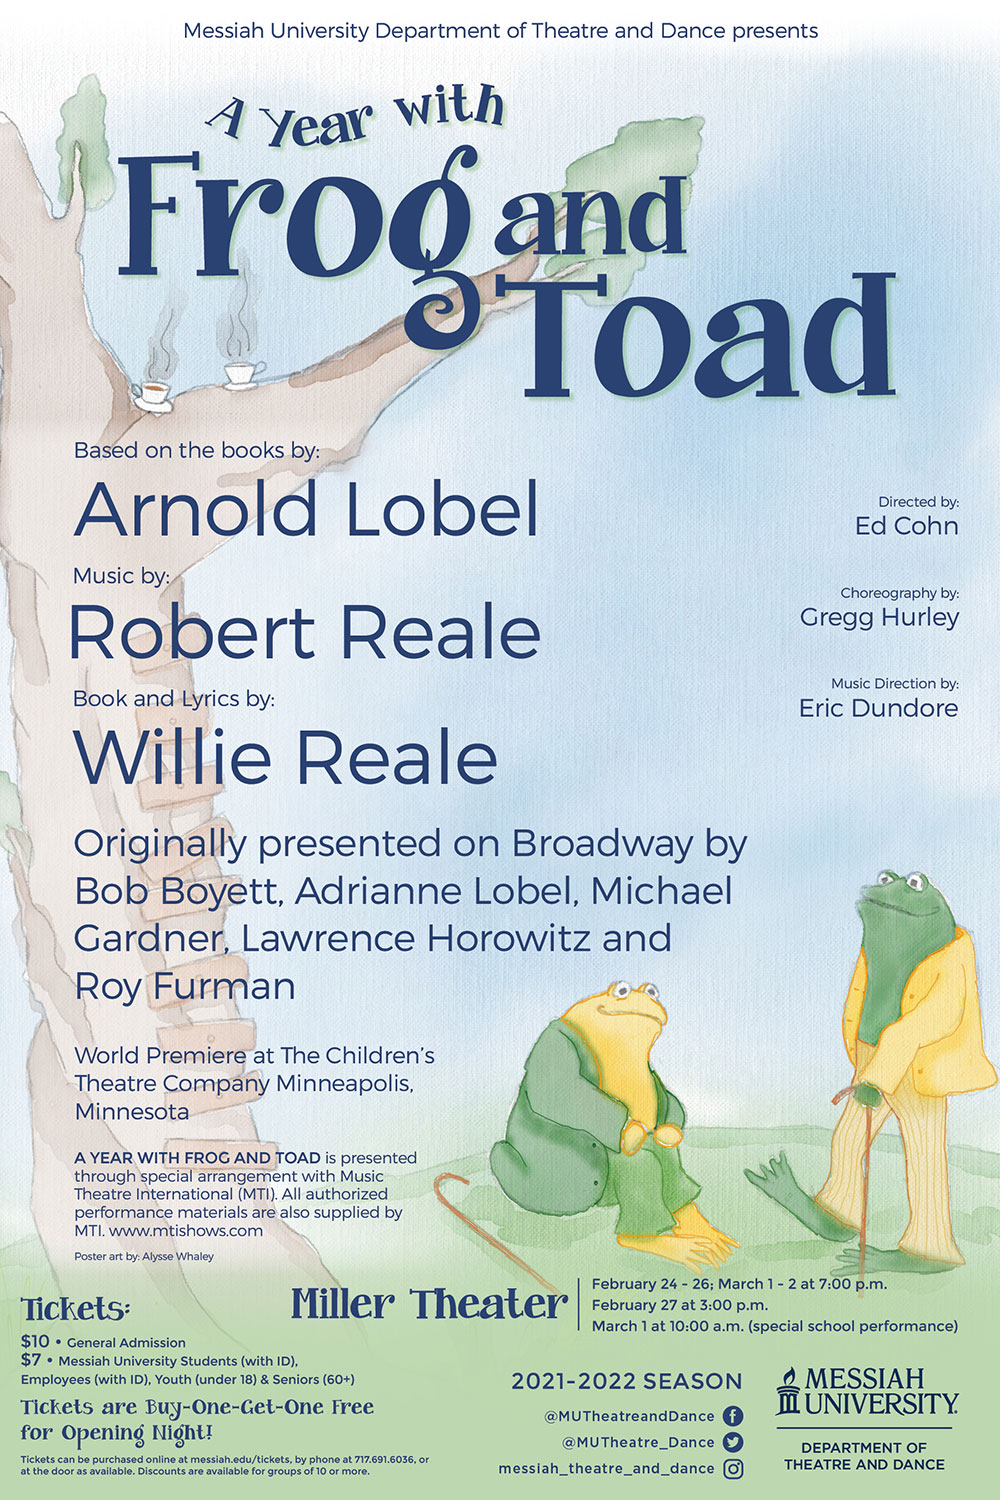 Frog and toad poster publicity